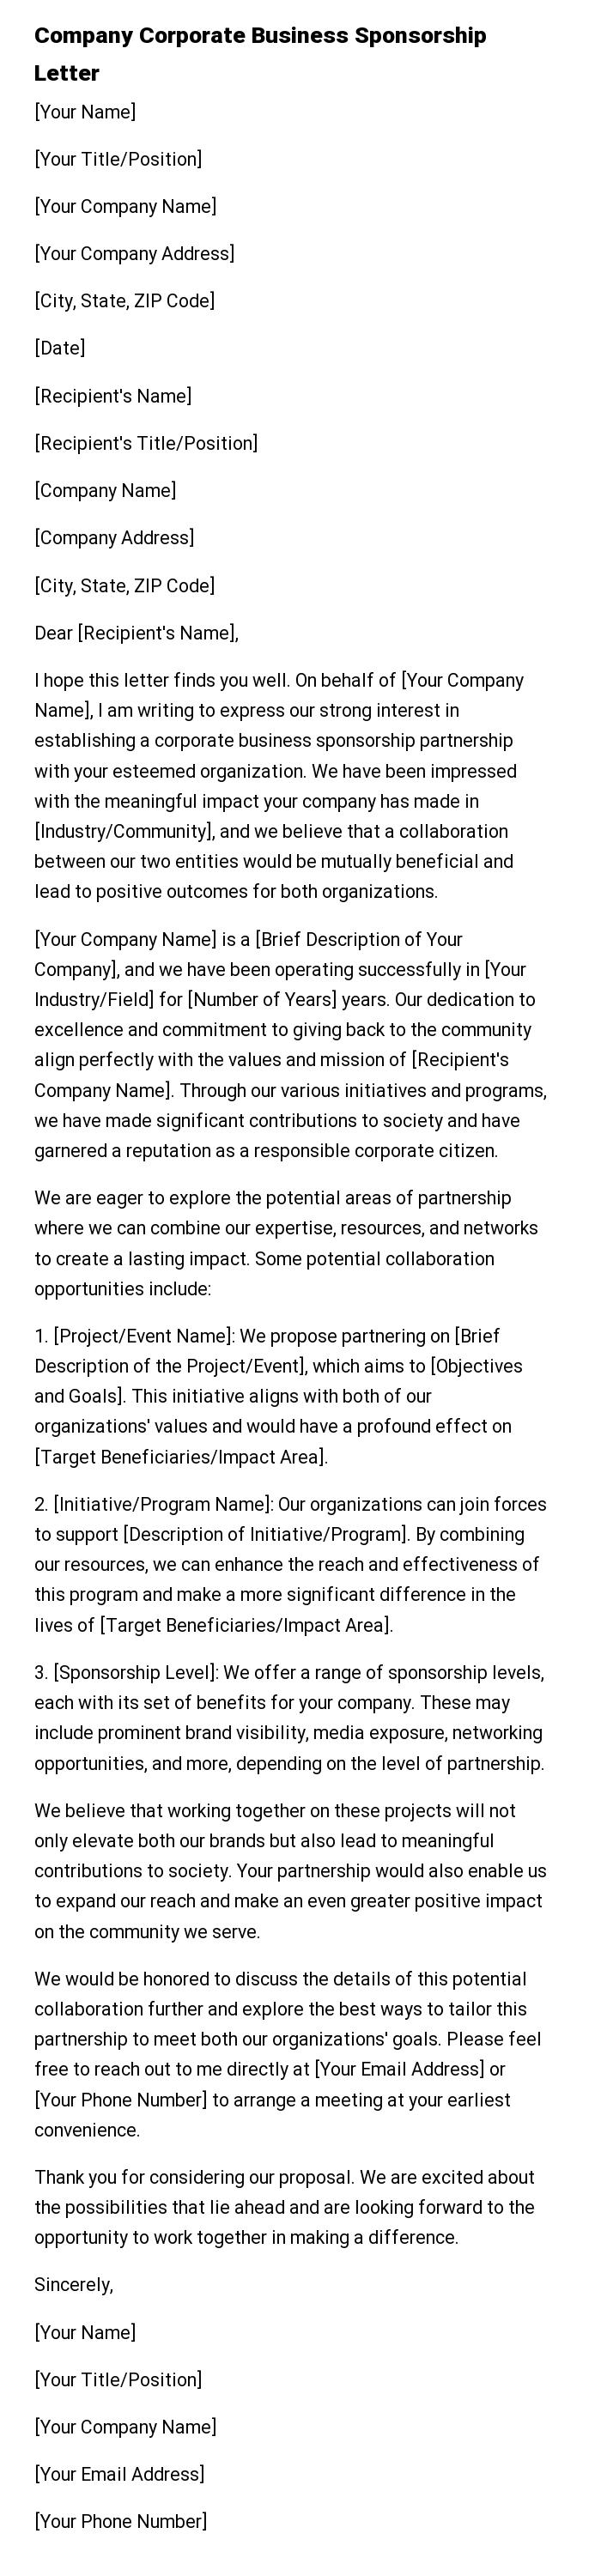 Company Corporate Business Sponsorship Letter